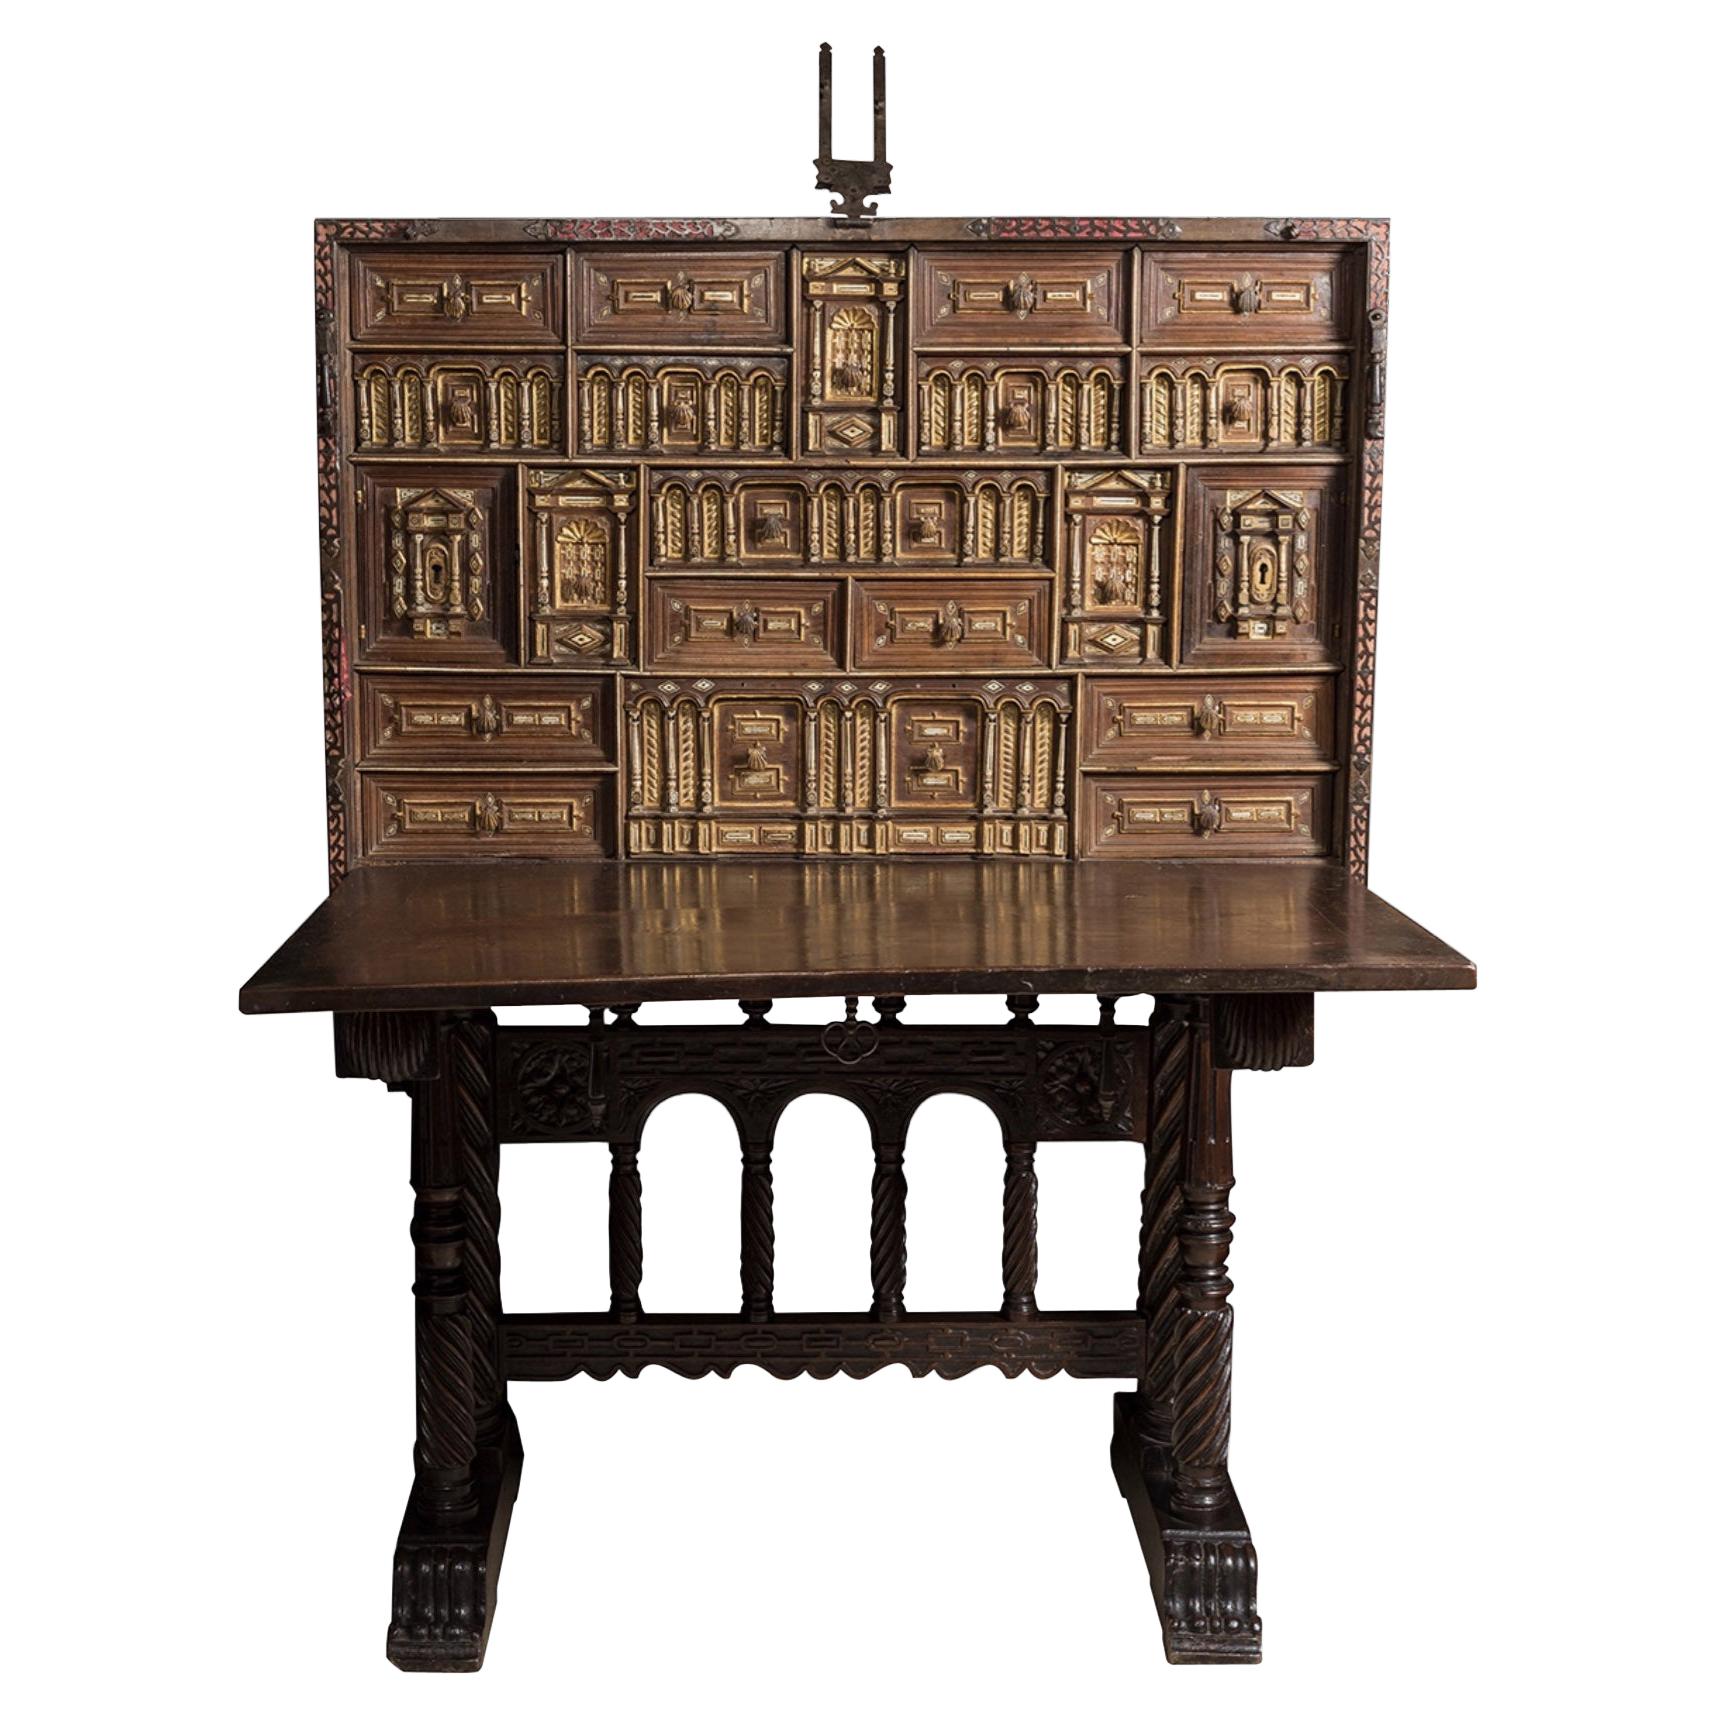 Spanish Desk or Cabinet or Bargueño, 17th Century, Stool or Base, 19th Century